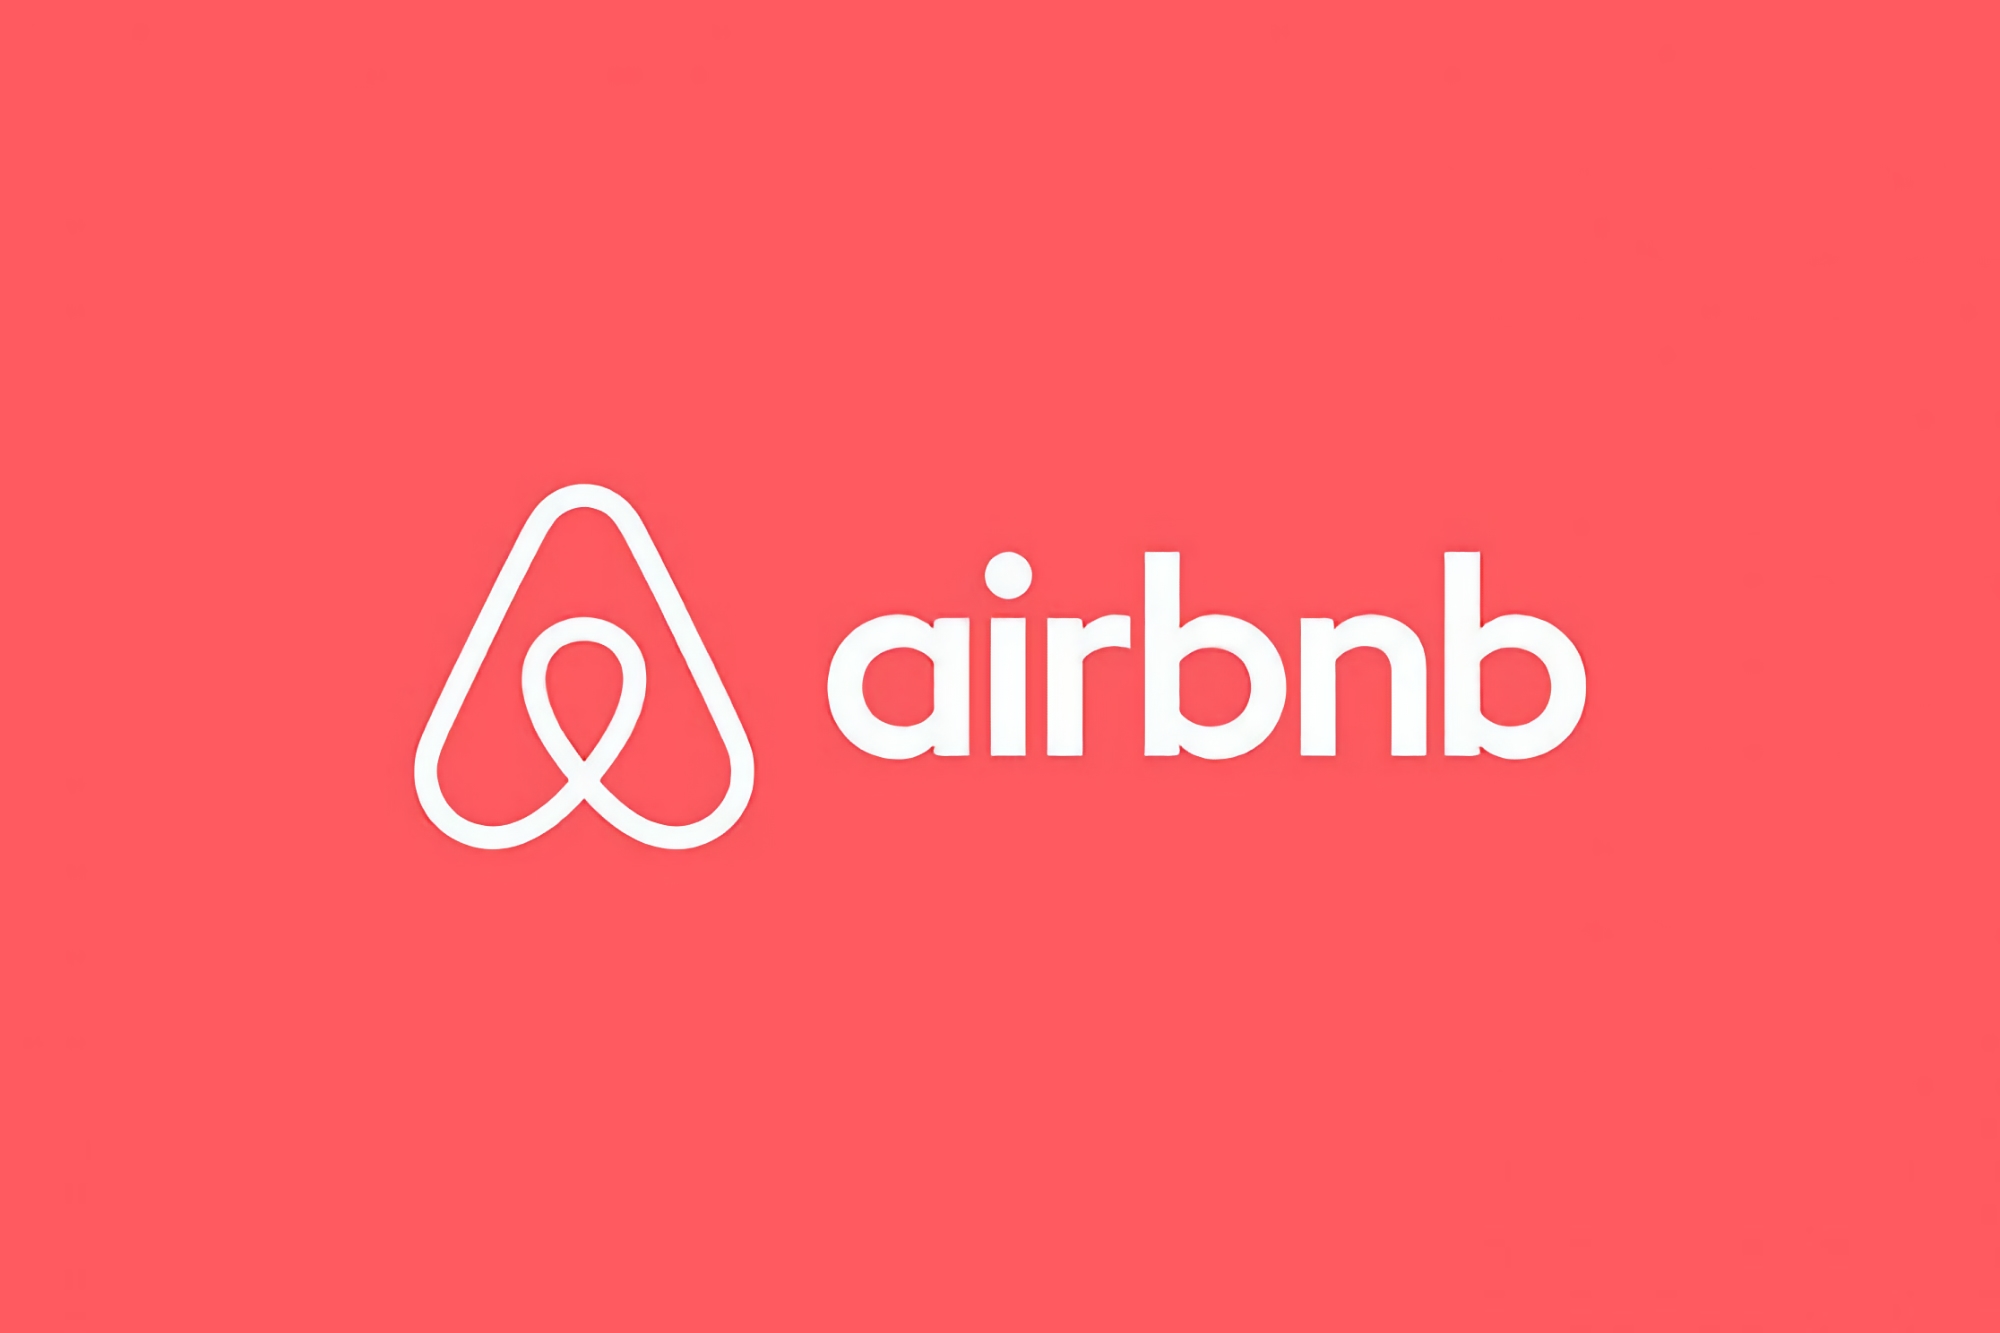 Russians and Belarusians will no longer be able to book accommodation through Airbnb